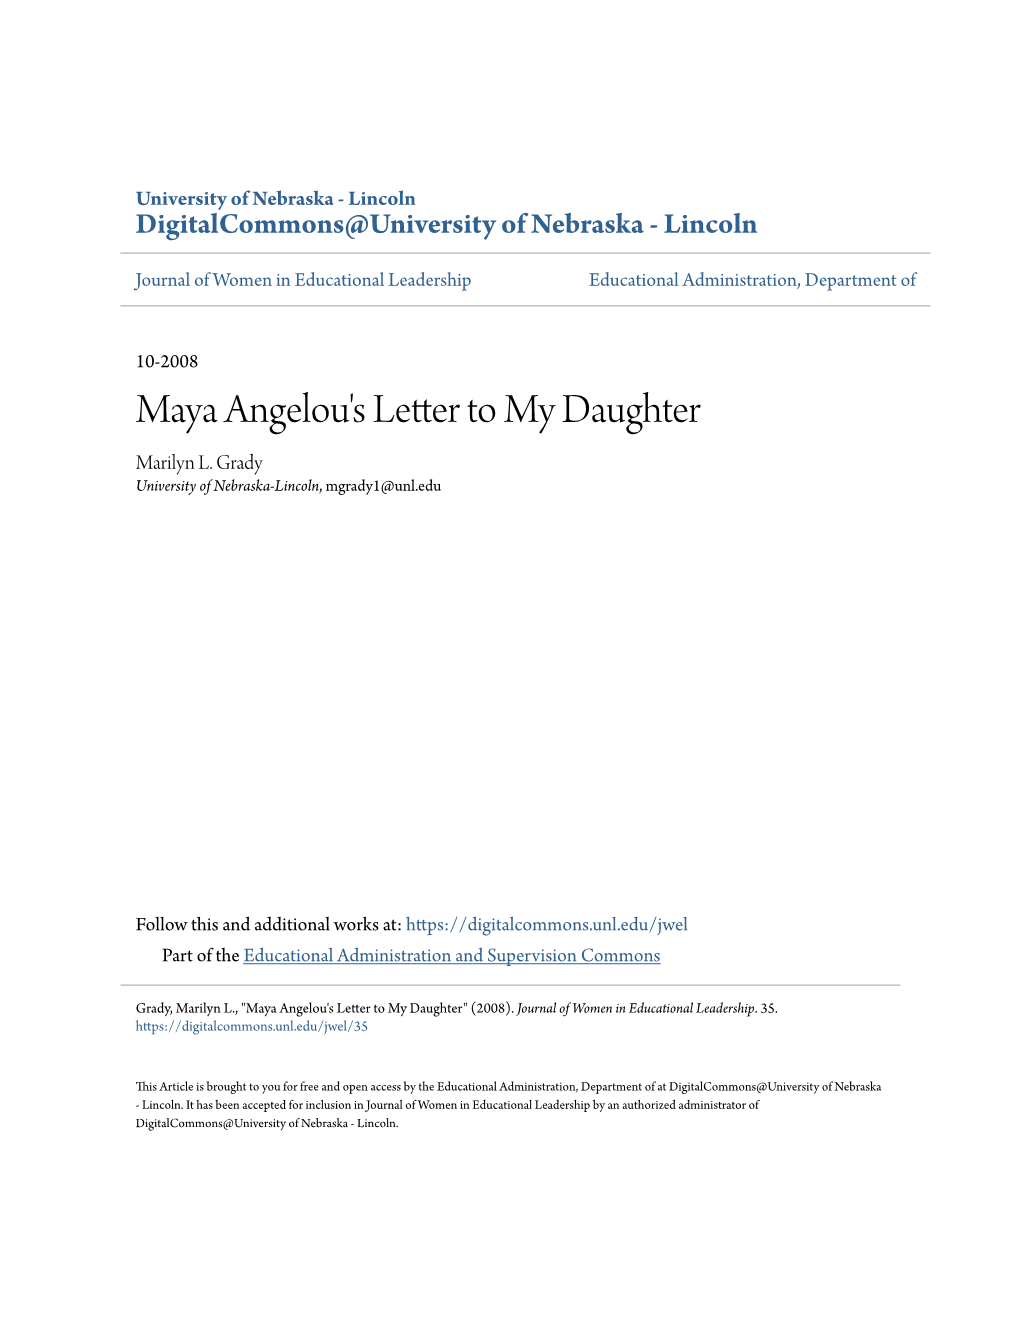 Maya Angelou's Letter to My Daughter Marilyn L